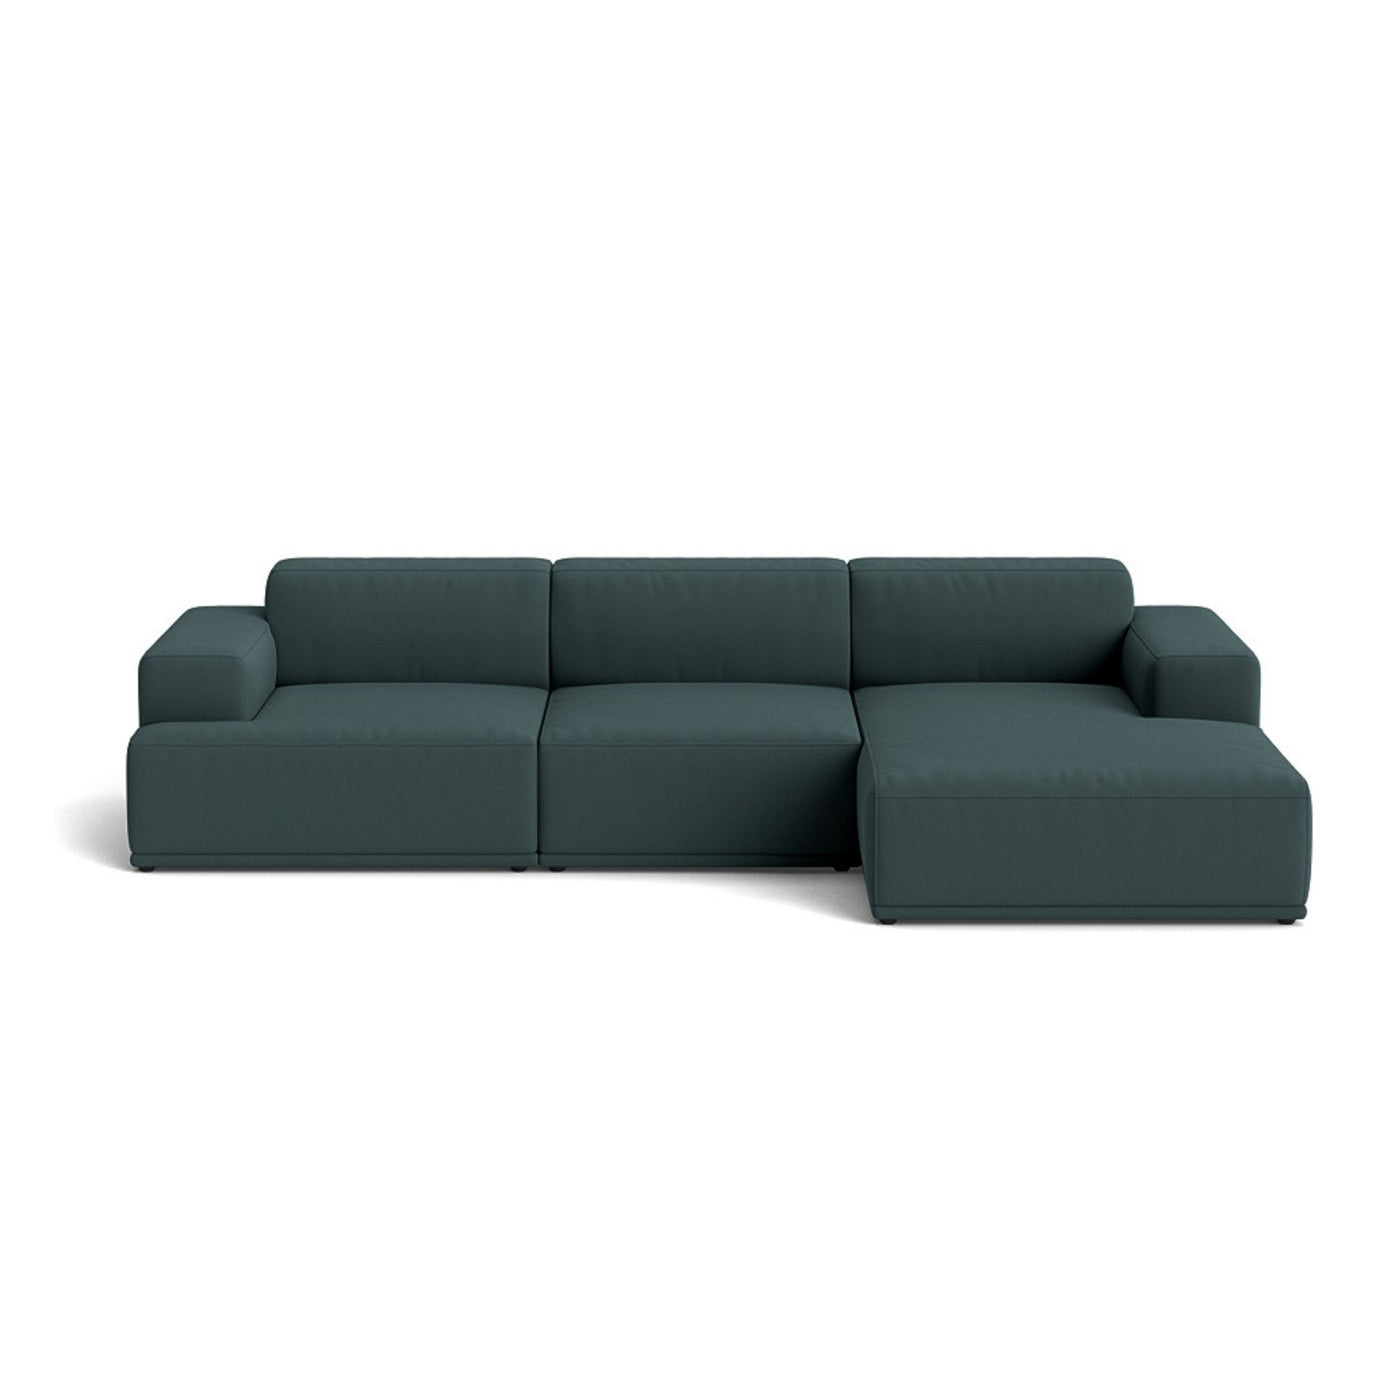 Muuto Connect Soft Modular 3 Seater Sofa, configuration 3. Made-to-order from someday designs. #colour_steelcut-180